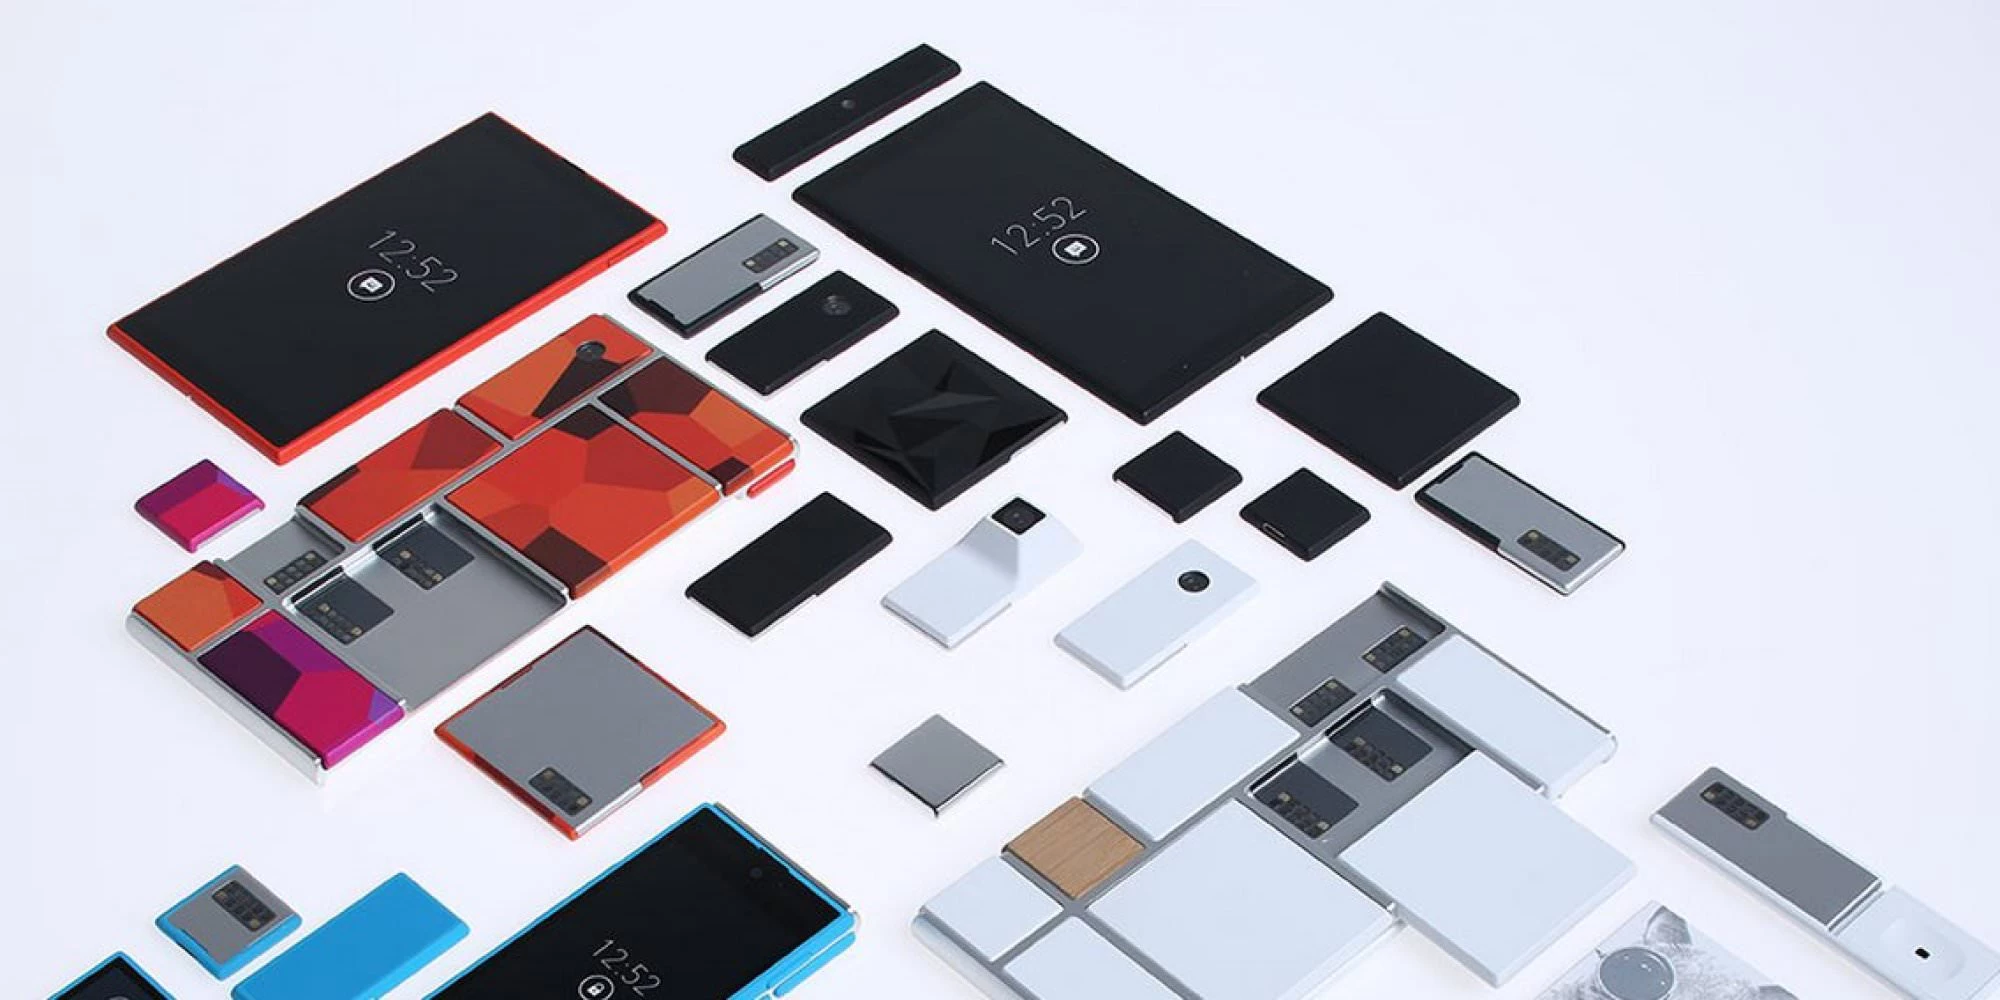 Collage of Project Ara device